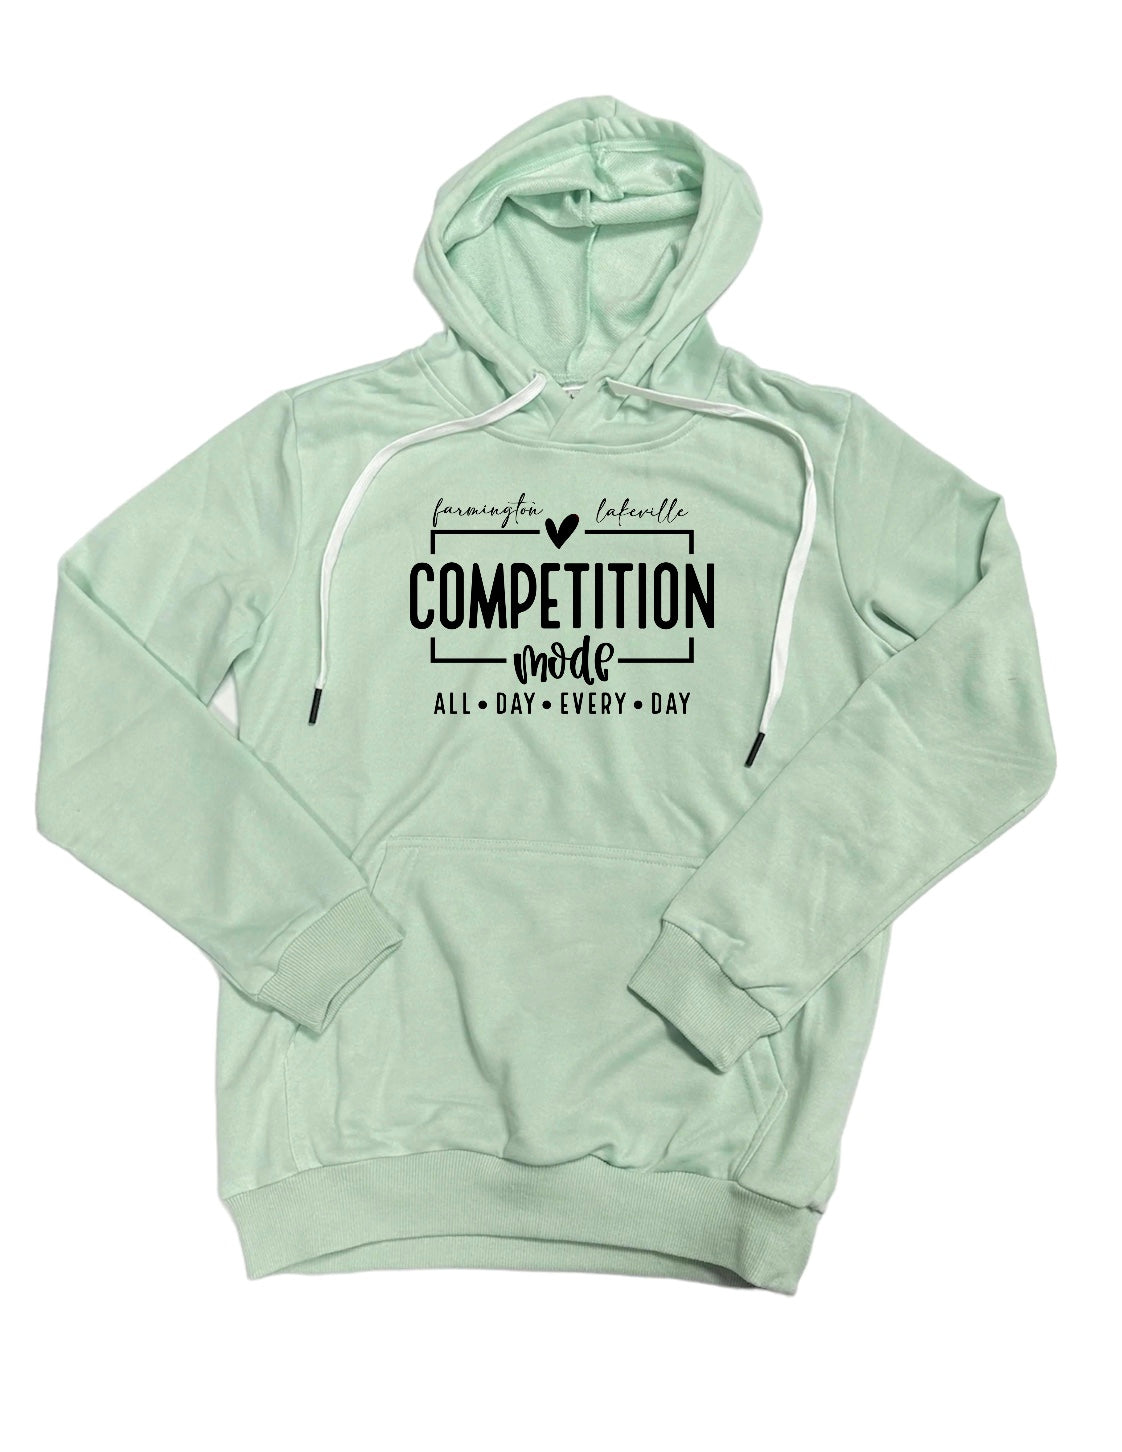 Competition Mode Hoodie-Tan/Pink/Mint